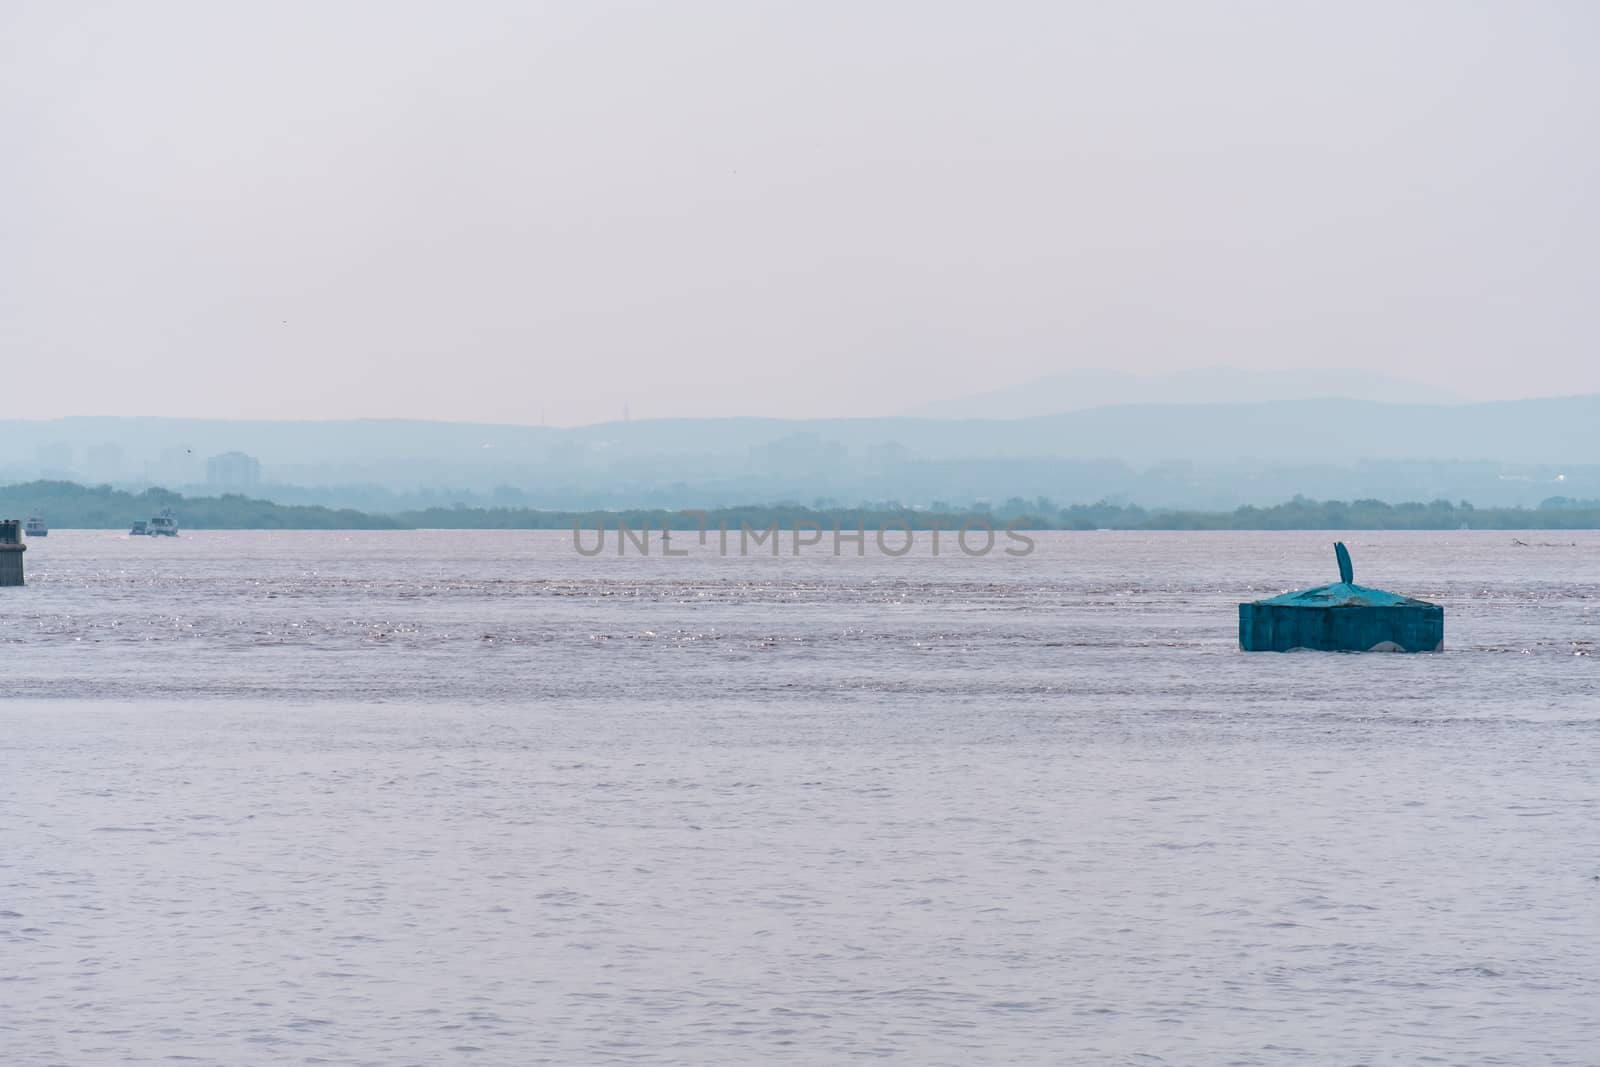 Khabarovsk, Russia - Aug 08, 2019: Flood on the Amur river near the city of Khabarovsk. The level of the Amur river at around 159 centimeters. by rdv27